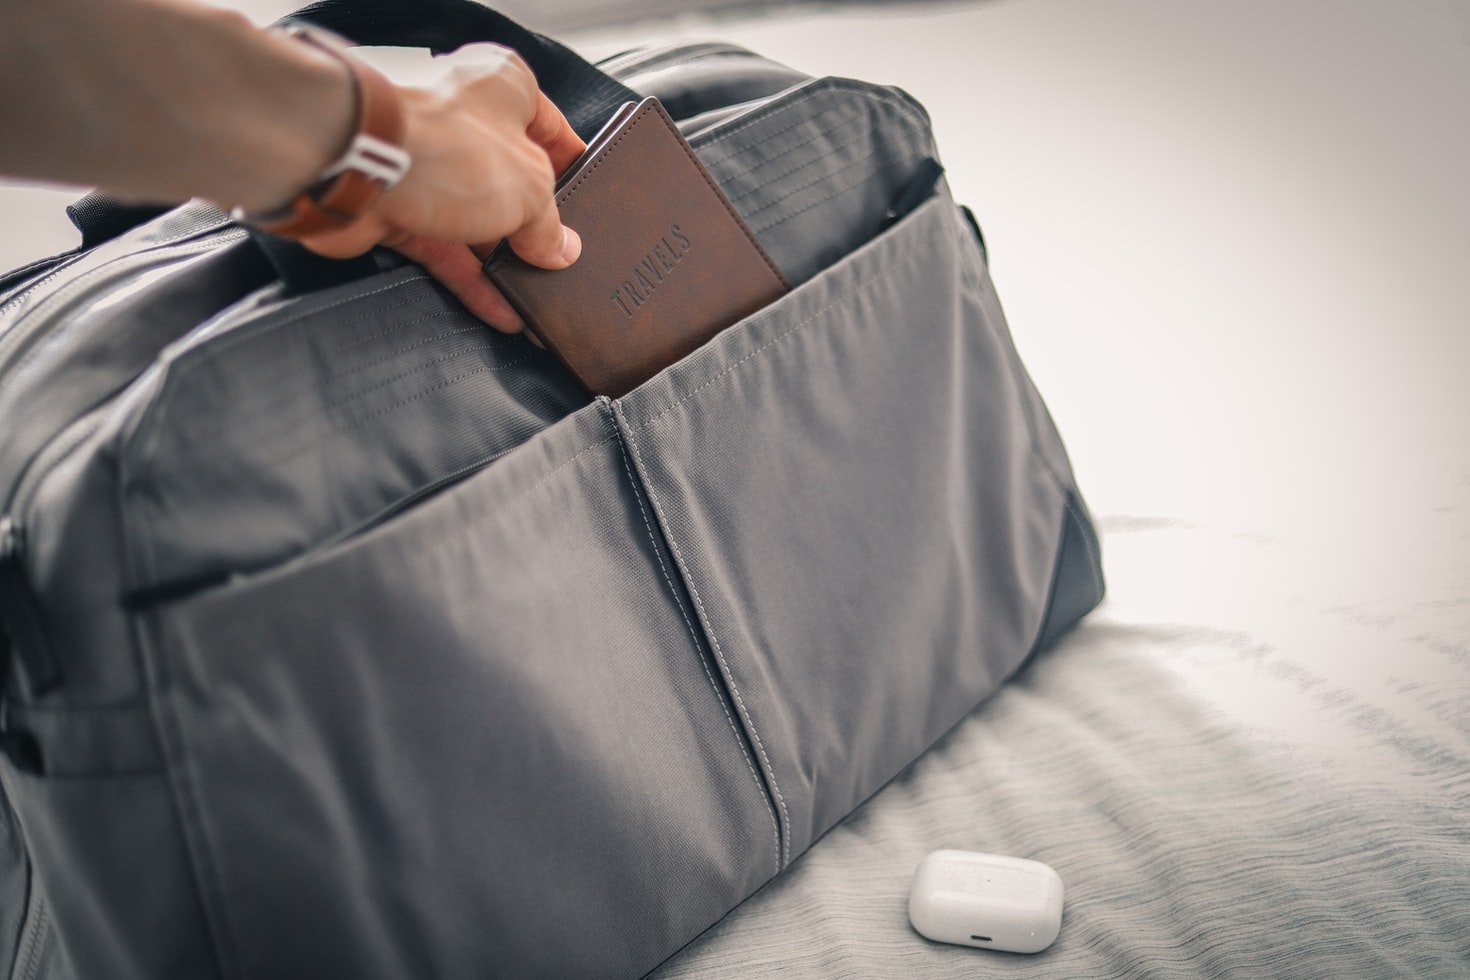 Jack packed everything for the trip except his cell phone | Source: Unsplash